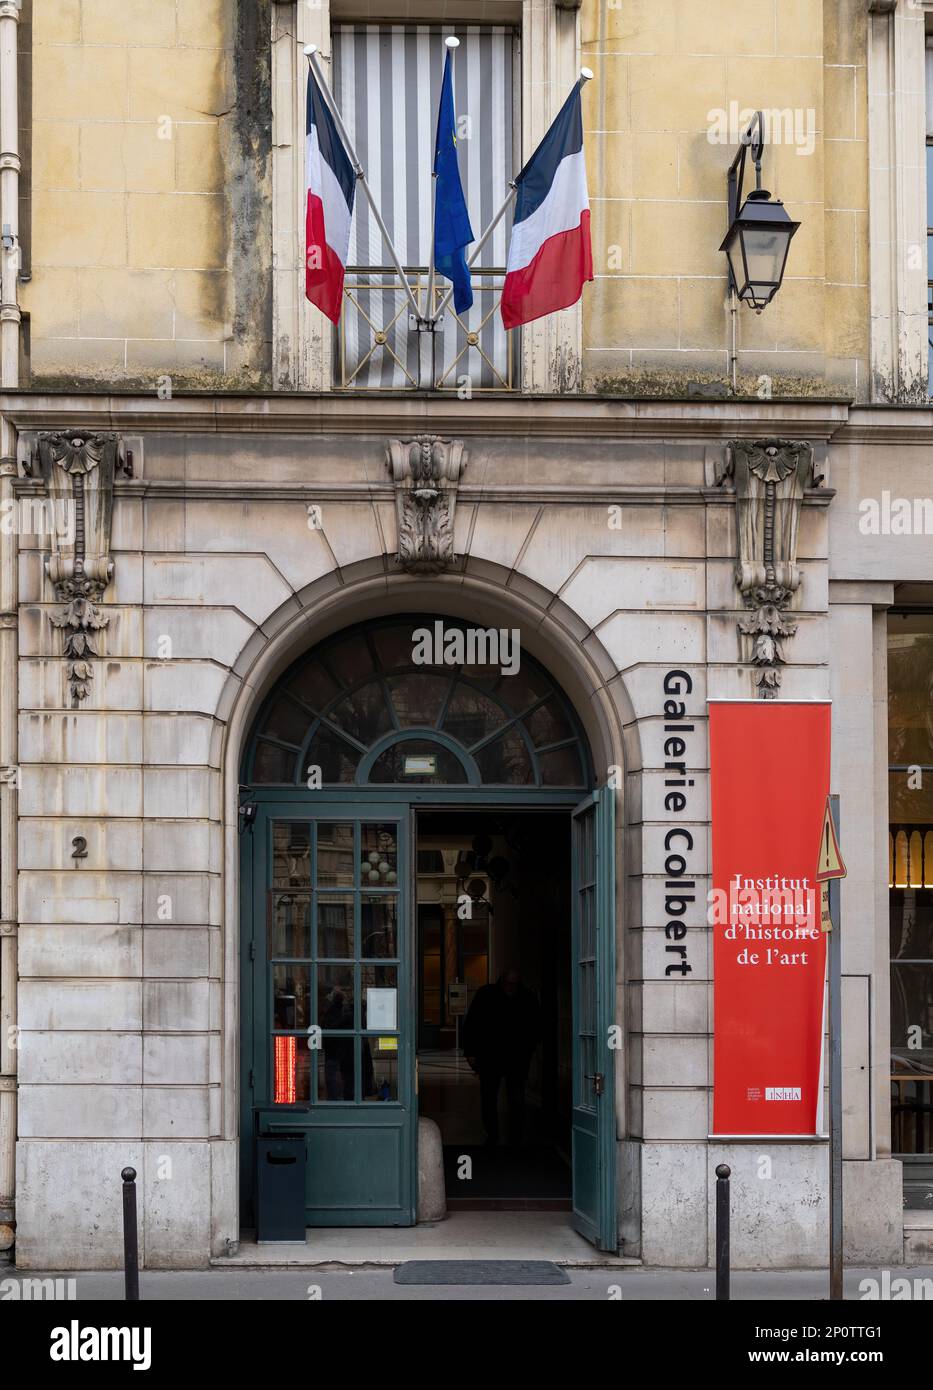 Entrance to Colbert Gallery in Paris, France Stock Photo